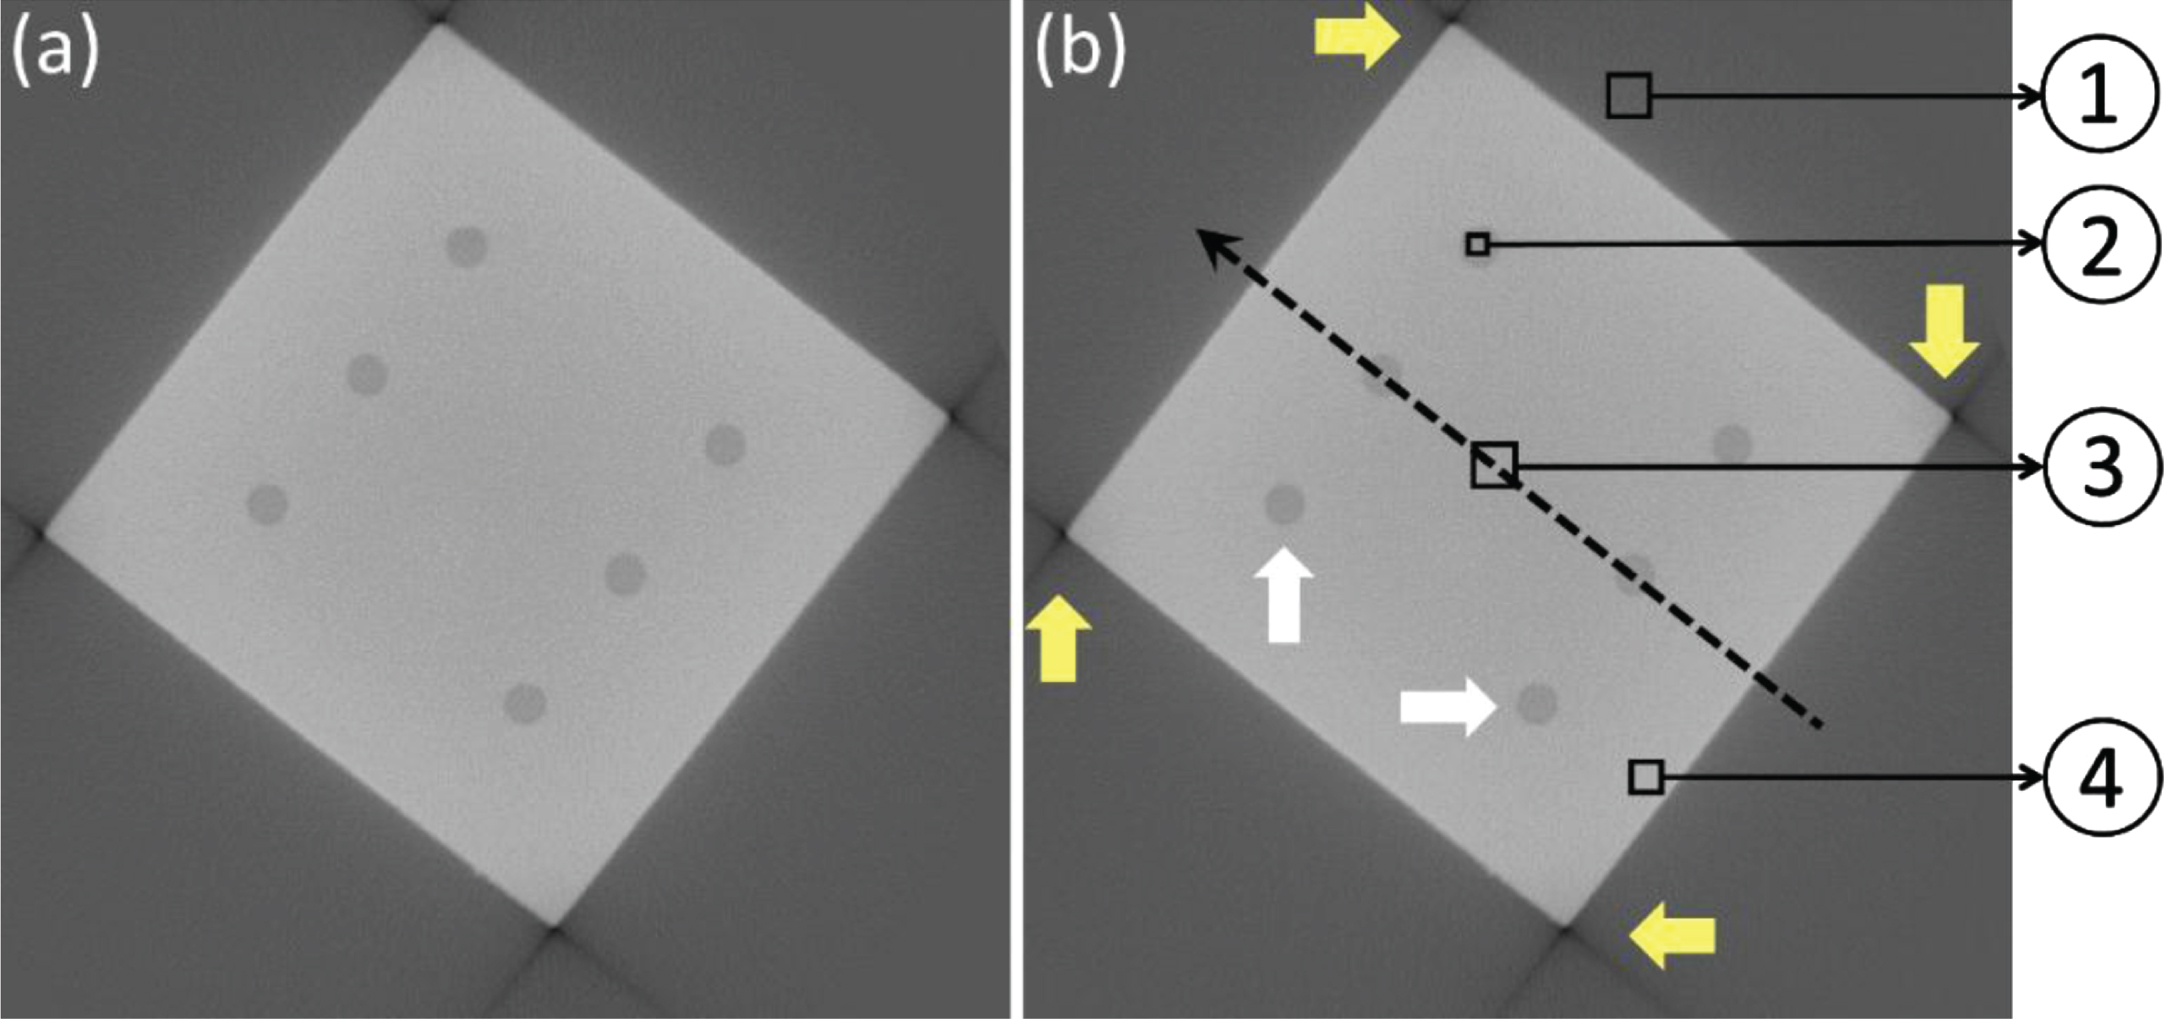 (a) A CT image of the titanium cuboid, and (b) same image with arrows showing artefacts and rectangles indicating areas of interest. See text for details.